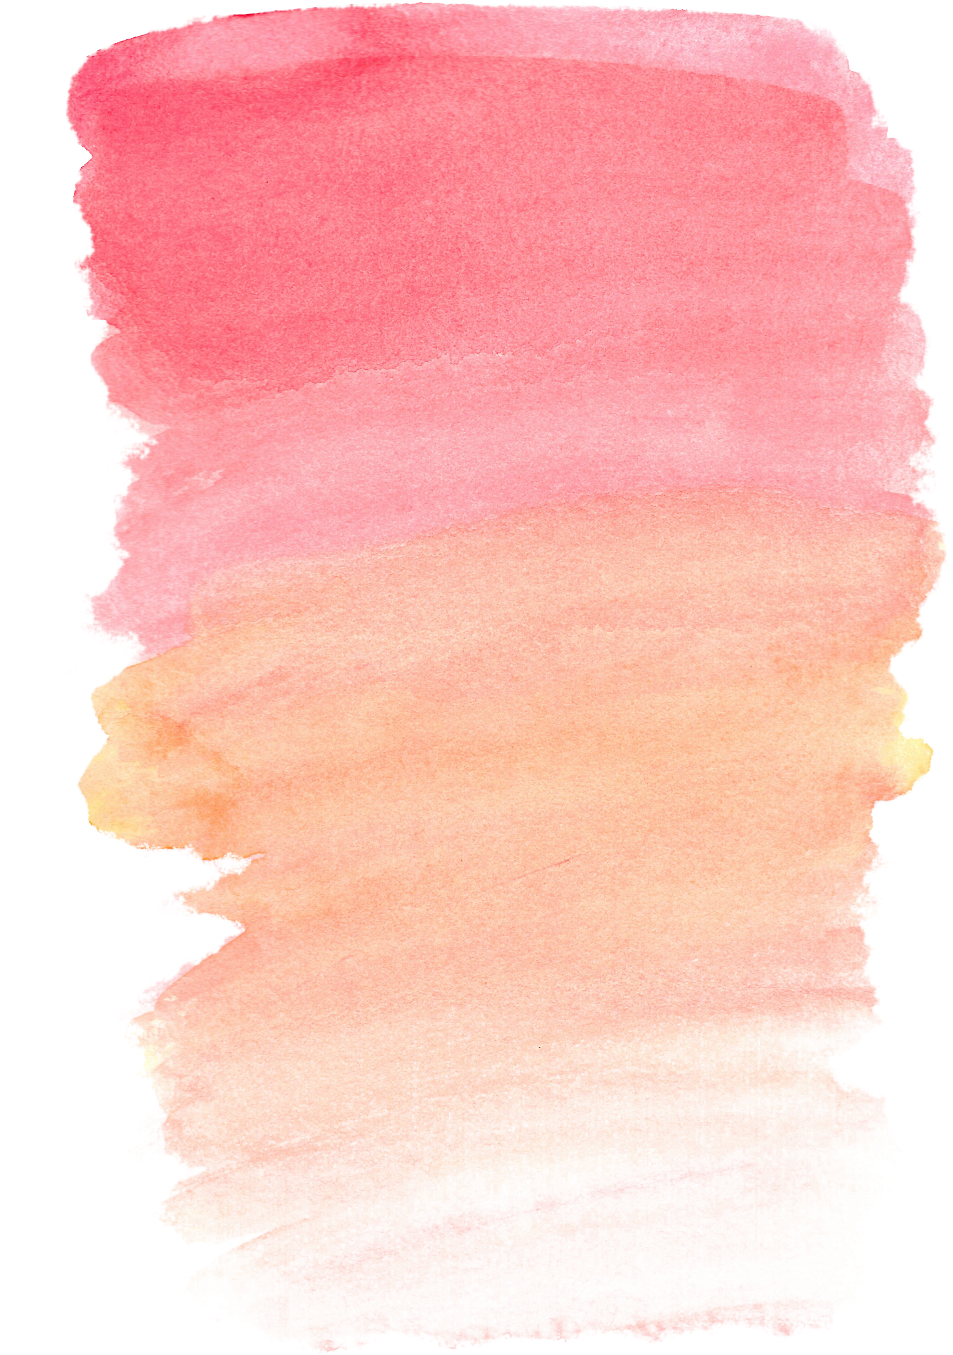 Orange And Red Ombre Watercolor Background